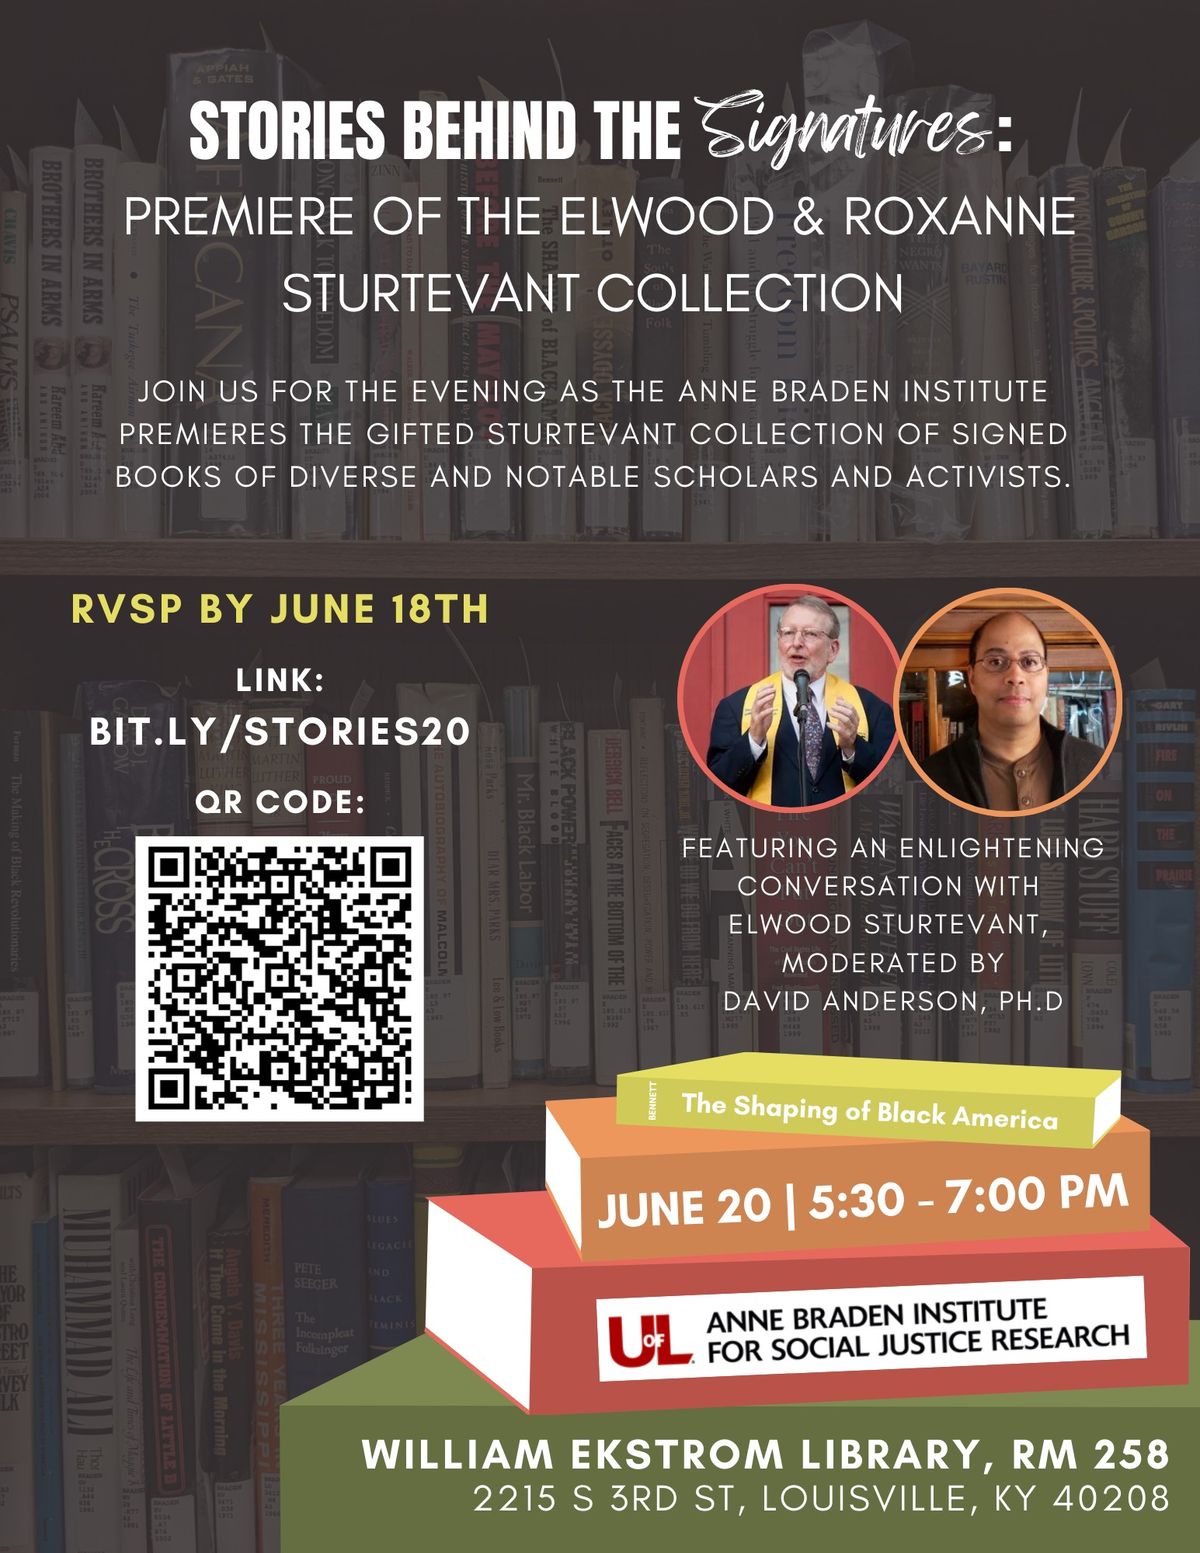 Stories Behind the Signatures: Premiere of the Roxanne & Elwood Sturtevant Collection